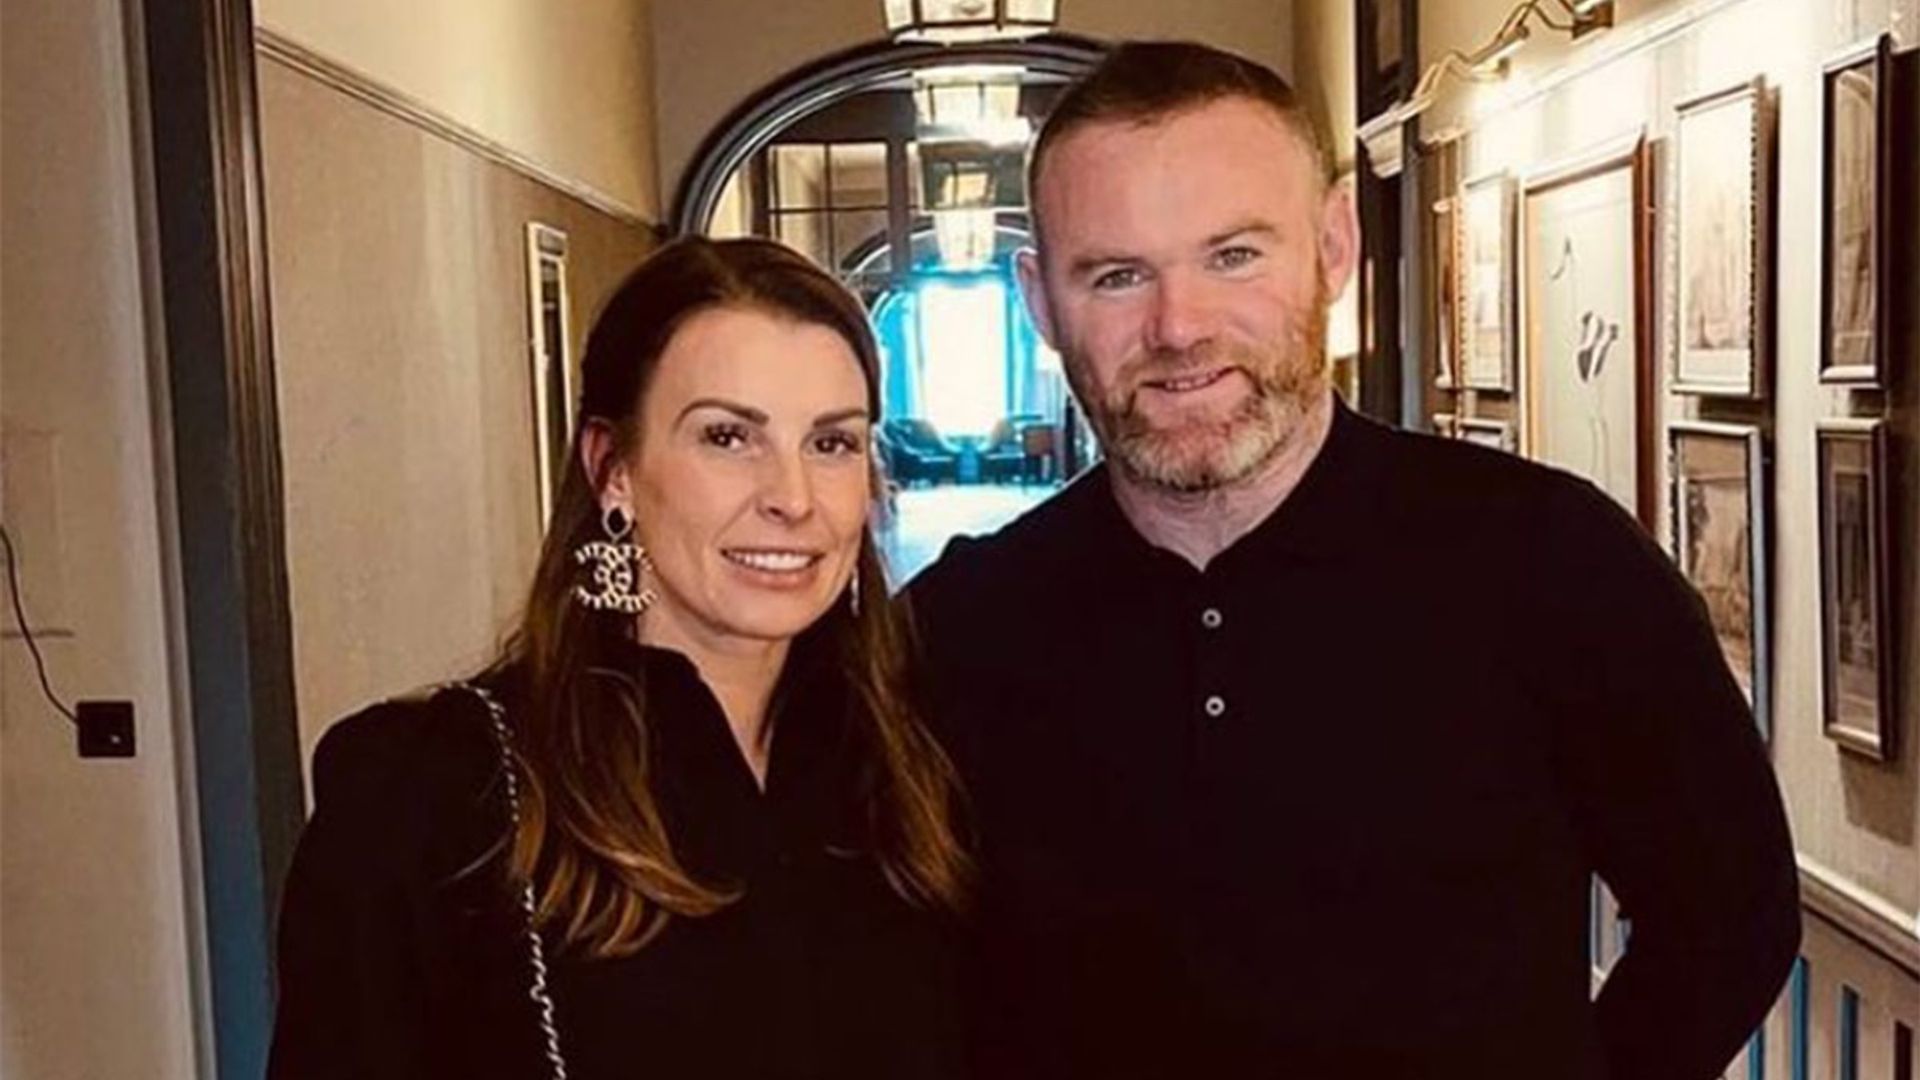 Wayne and Coleen Rooney move into new £20m mansion and share first peek inside